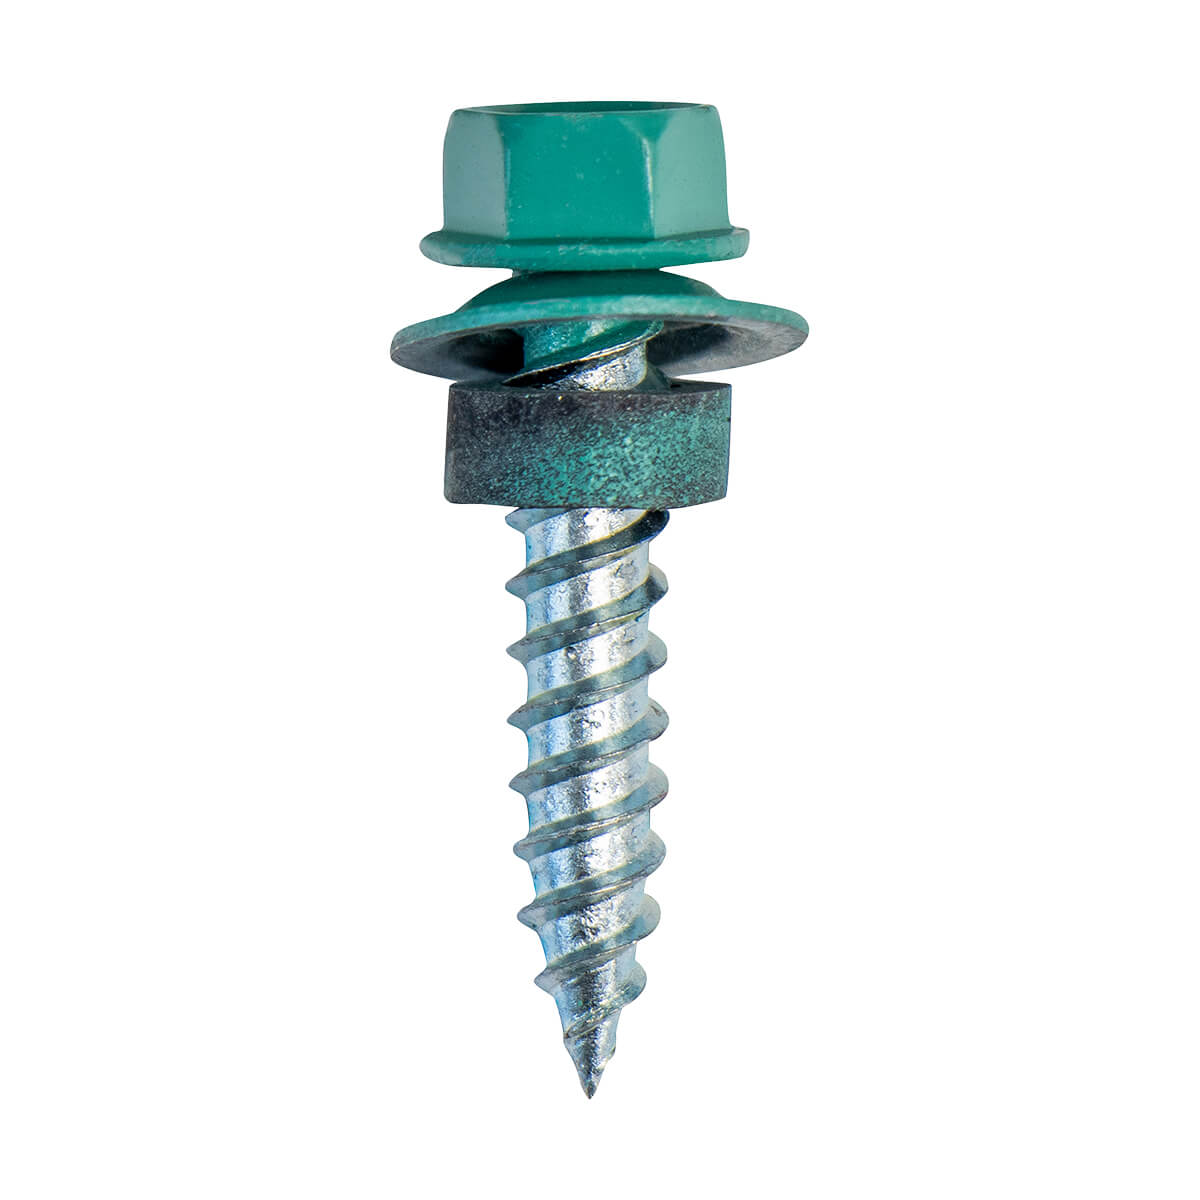 Wood gripper - #14 x 1-1/4-in - Turquoise